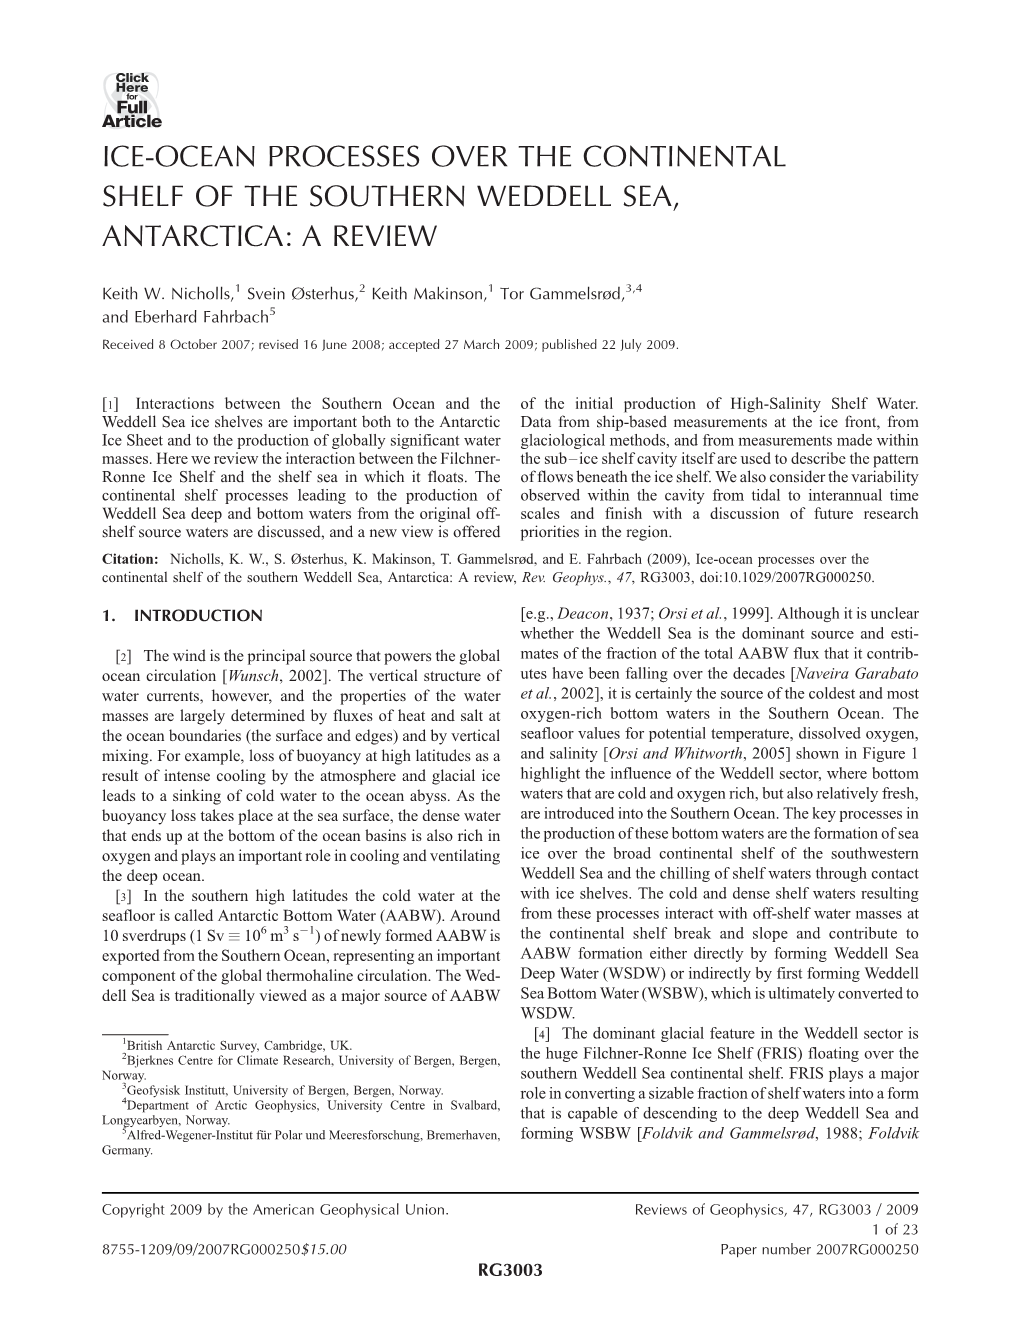 Ice-Ocean Processes Over the Continental Shelf of the Southern Weddell Sea, Antarctica: a Review